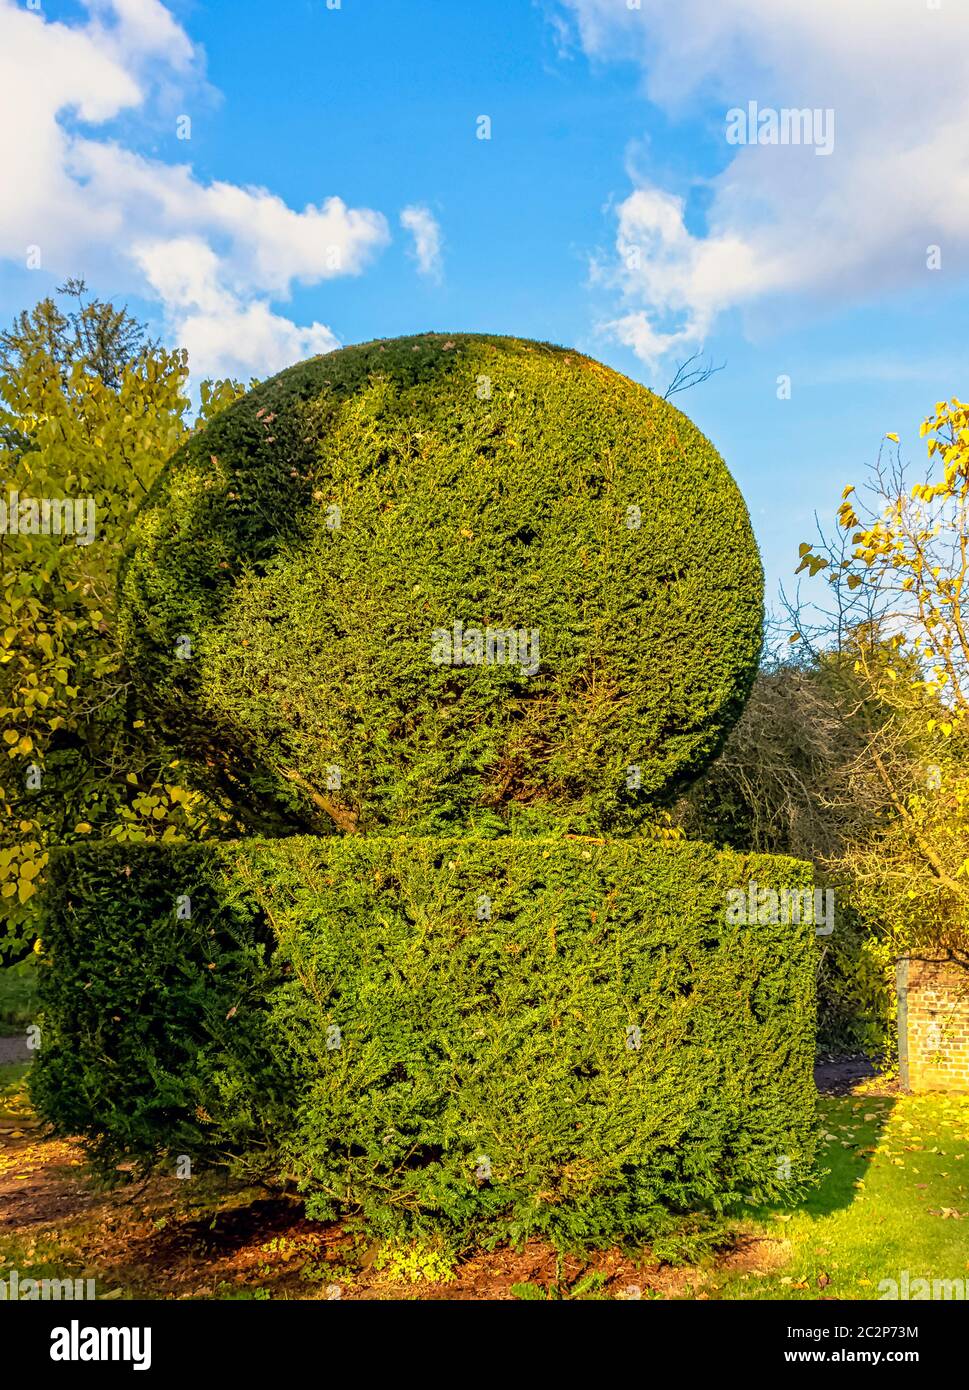 Topiary garden with shrub trimmed into shape Stock Photo